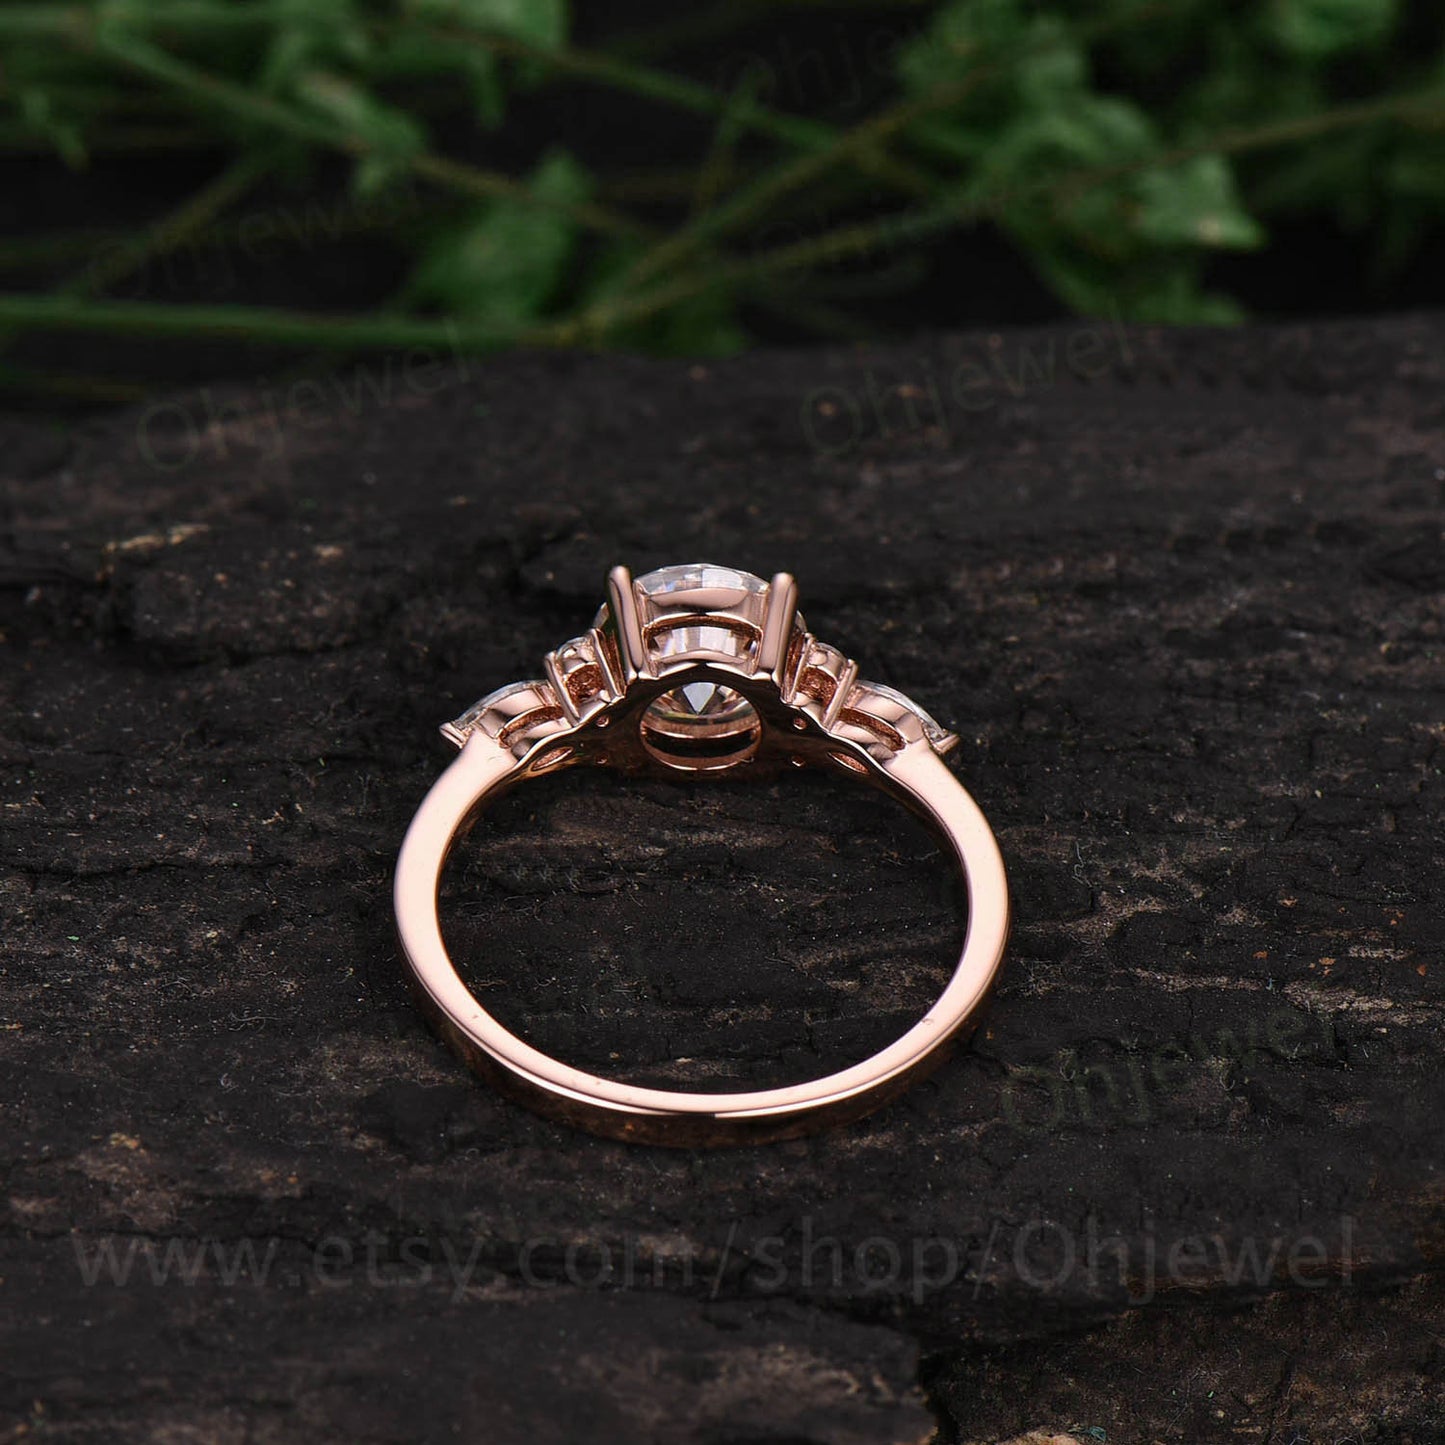 Vintage aquamarine engagement ring 7 stone ring rose gold ring March birthstone ring moissanite ring gold women jewelry anniversary gift